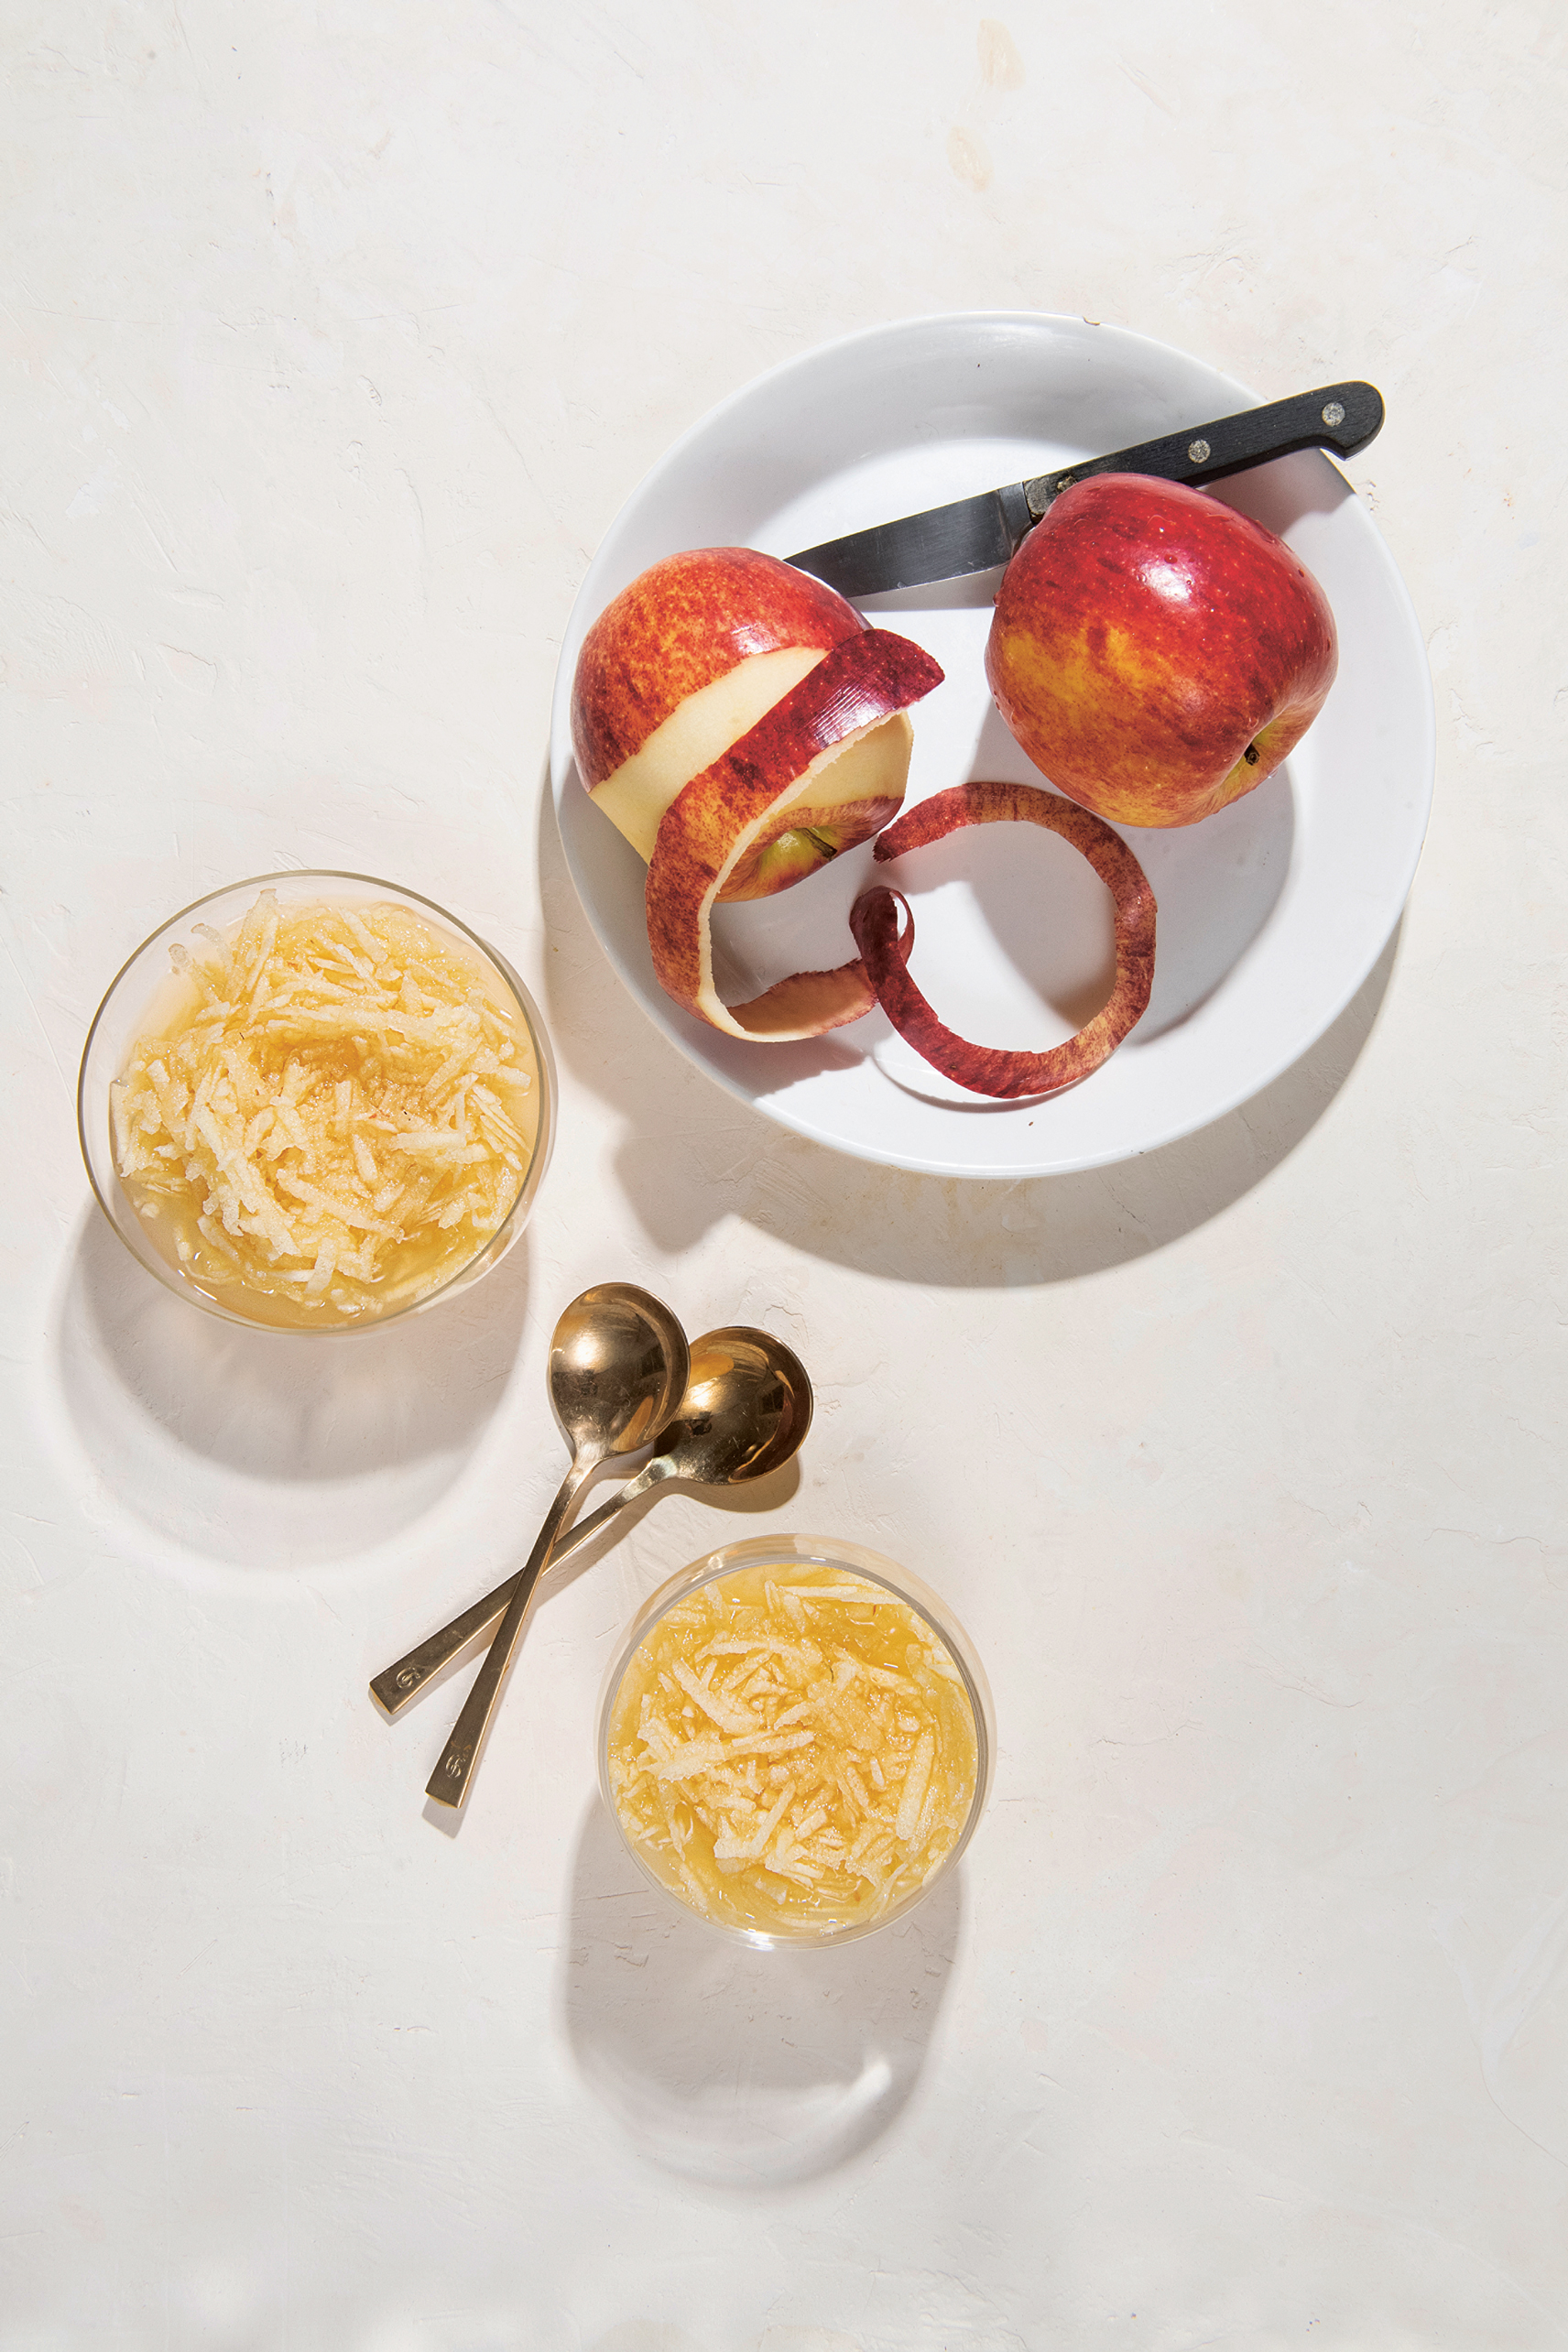 Chilled Apples with Rose WaterChilled Apples with Rose Water - The Jewish Cookbook